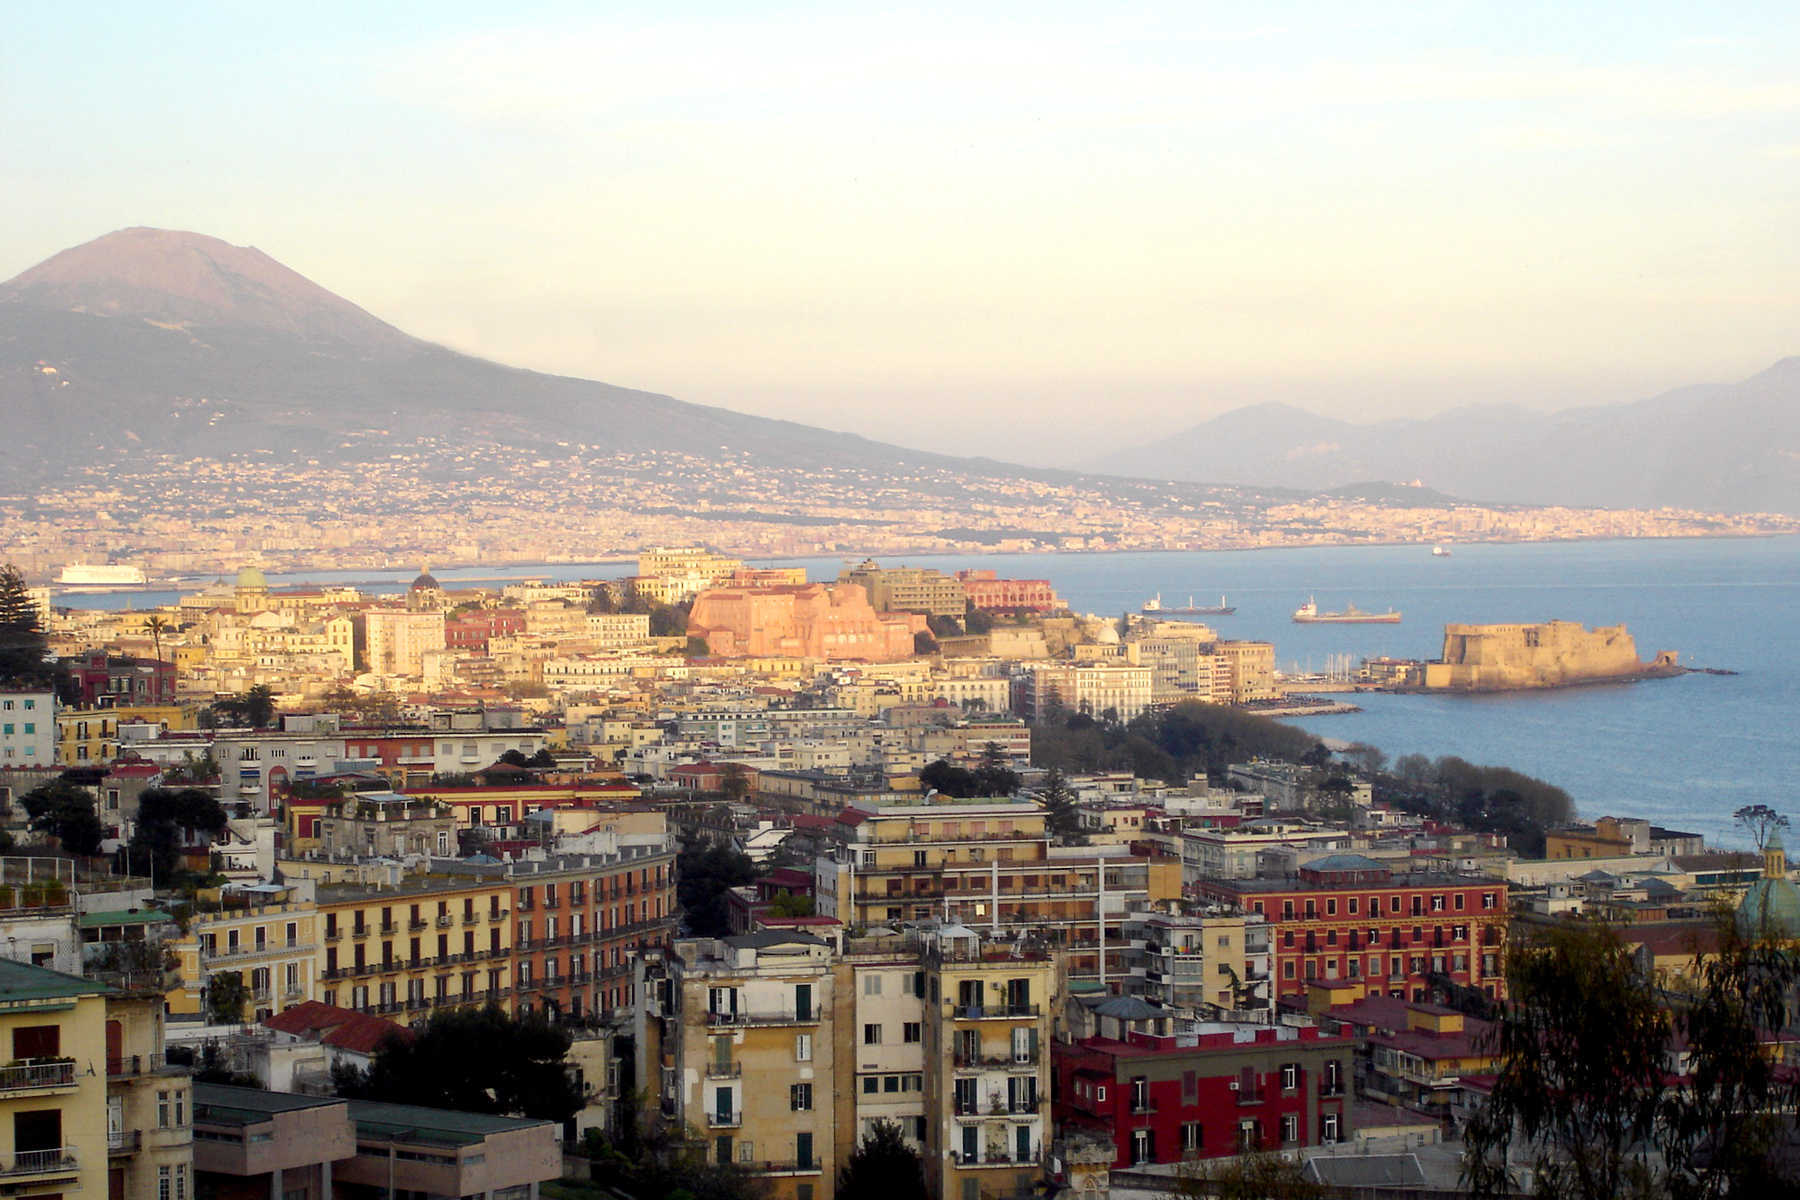 Naples, and the Amalfi by Rick Steves